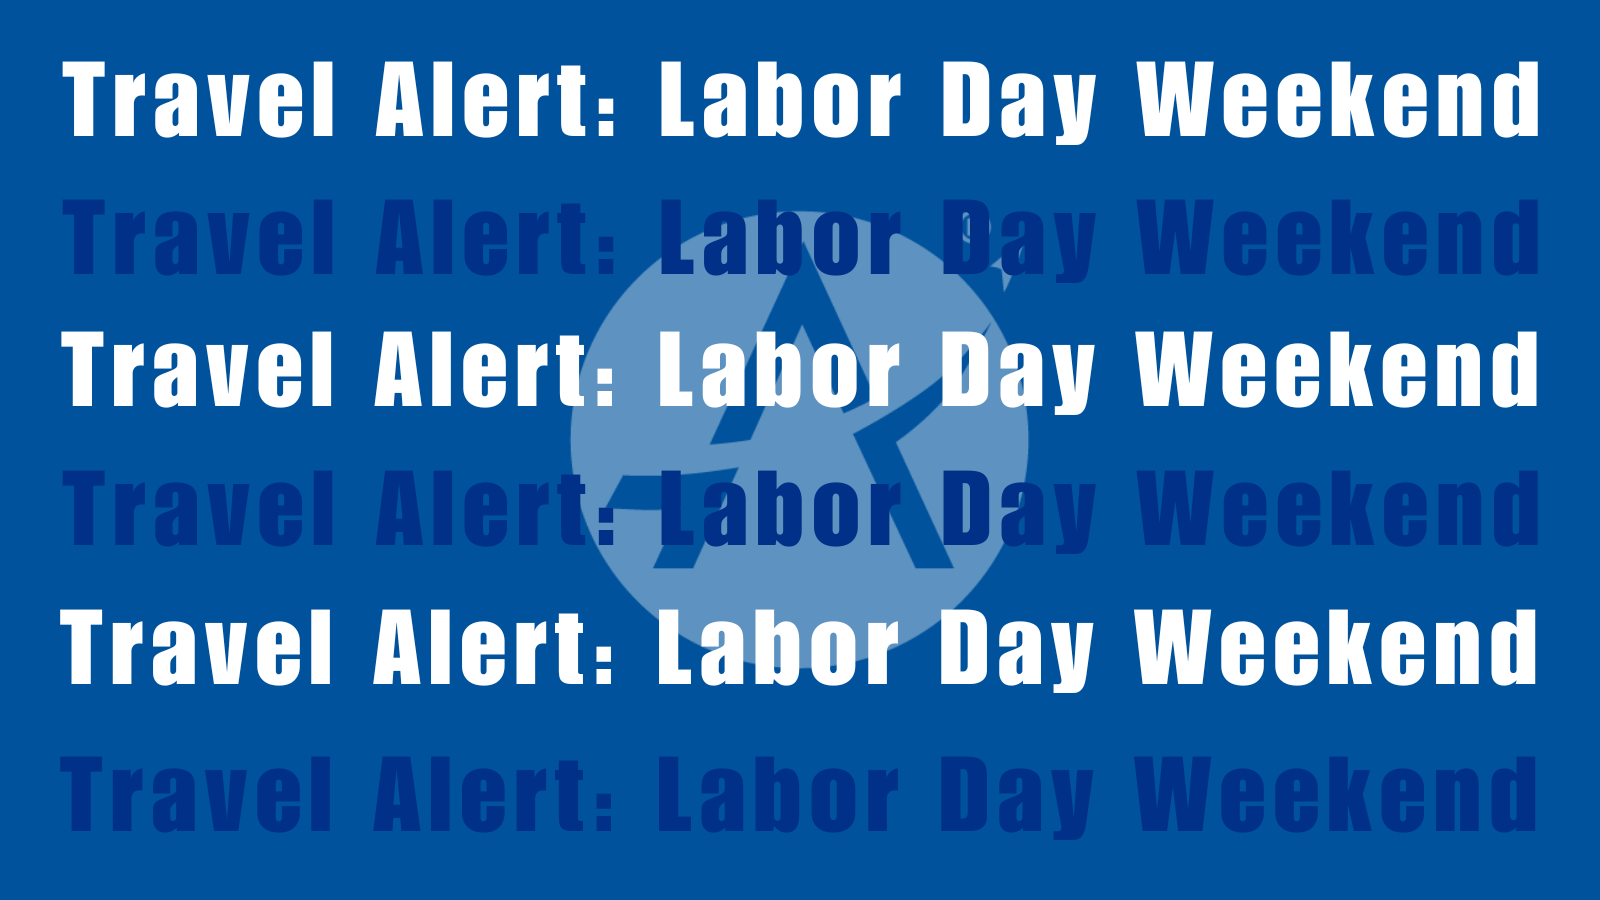 Text on graphic reads: Text Alert: Labor Day Weekend